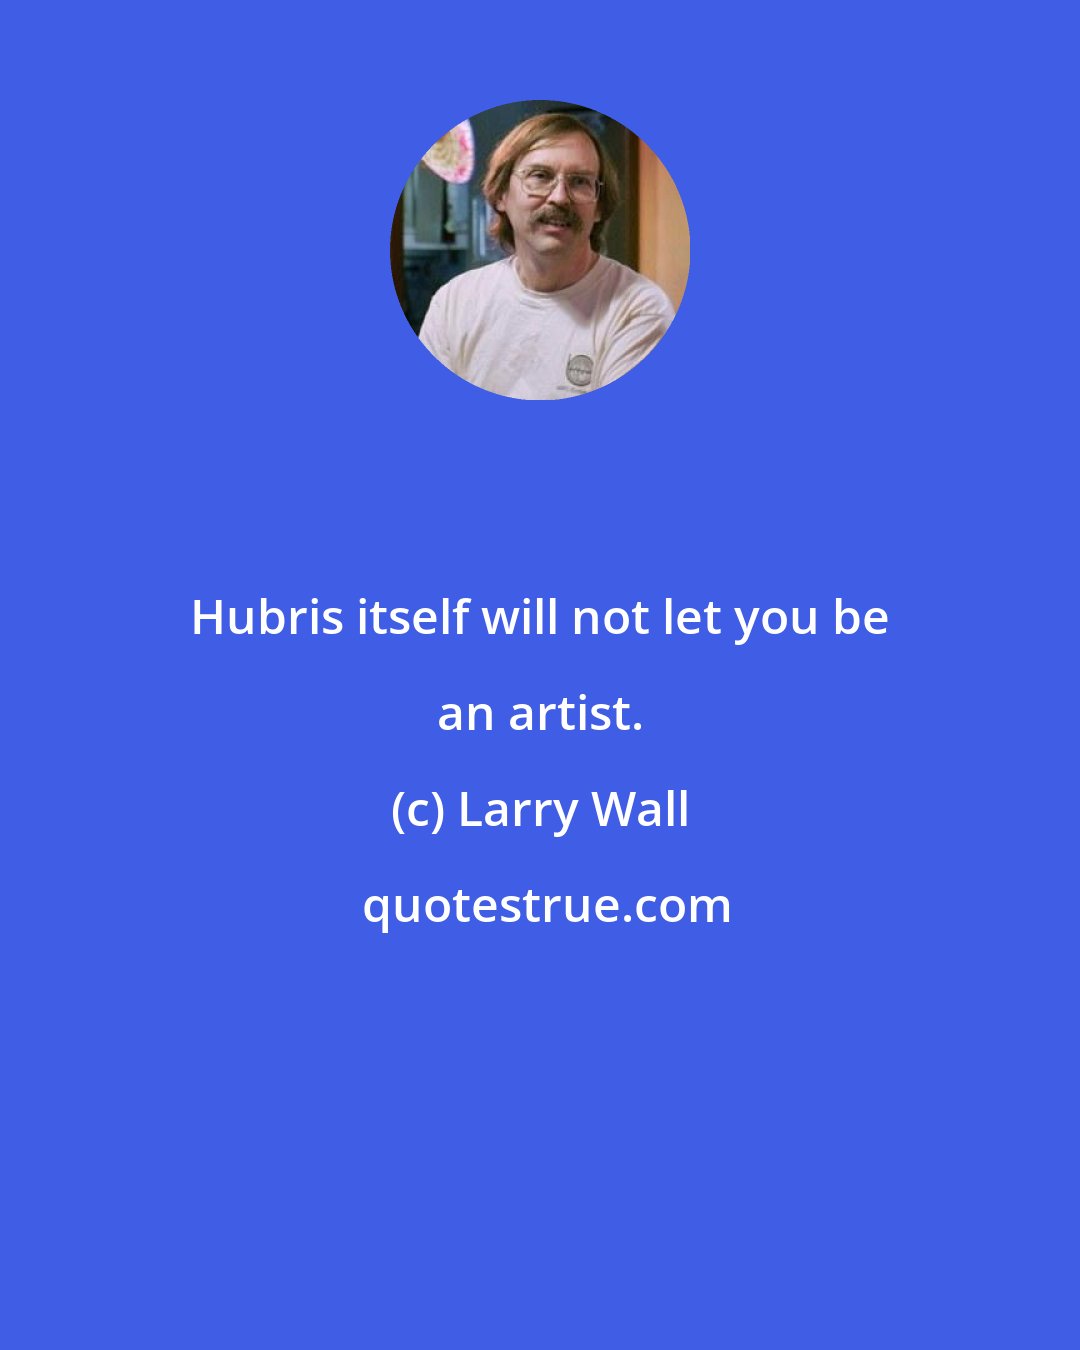 Larry Wall: Hubris itself will not let you be an artist.